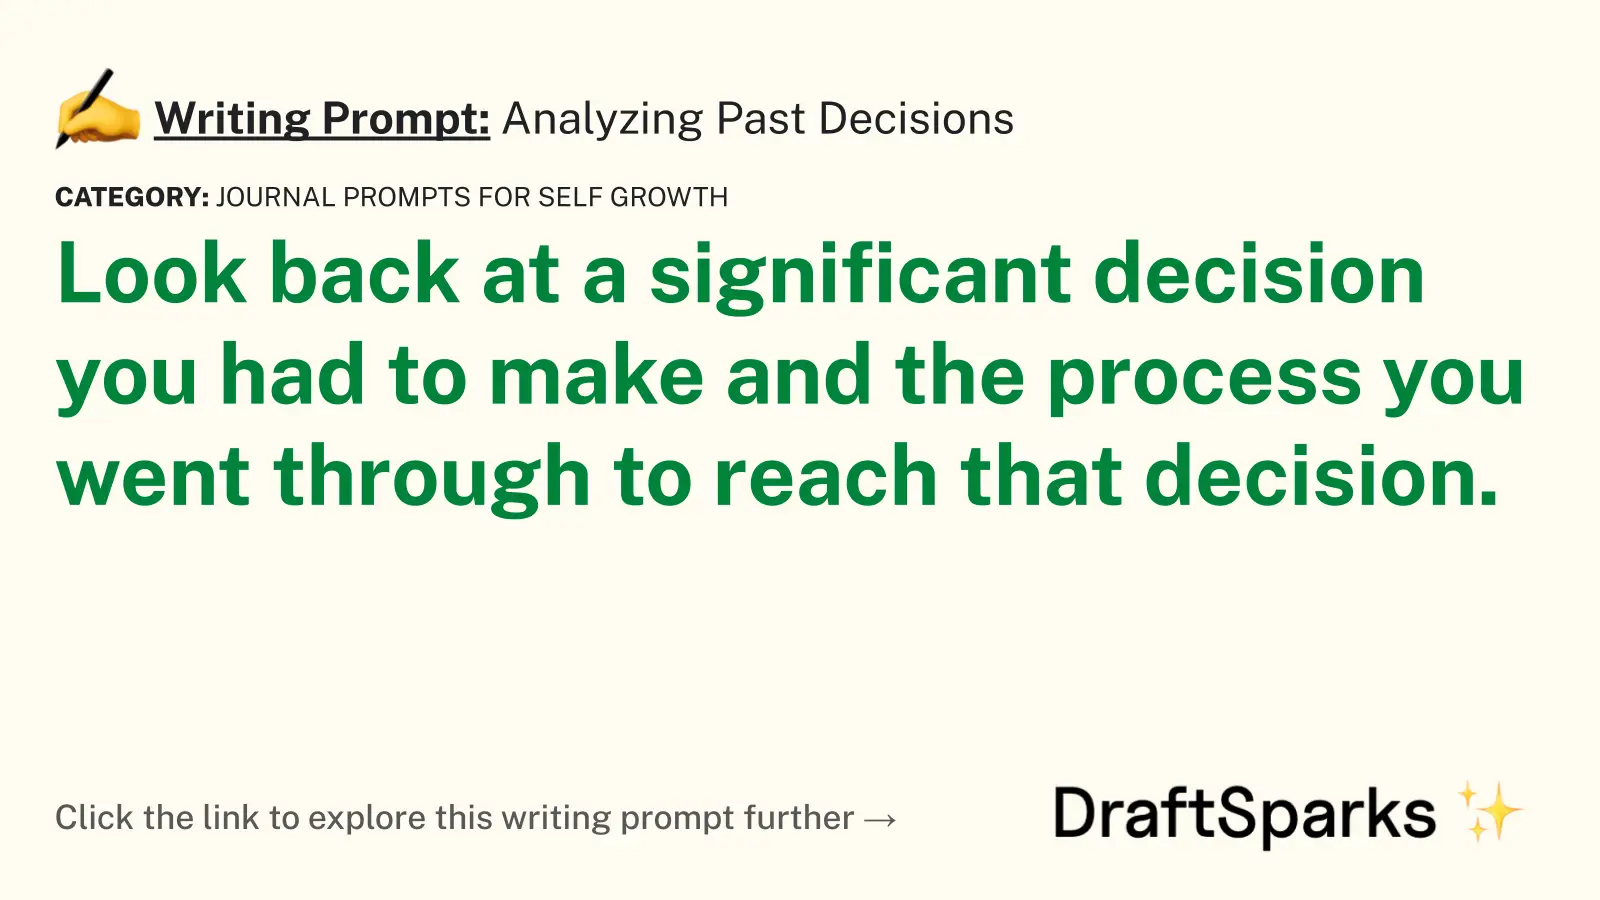 Analyzing Past Decisions